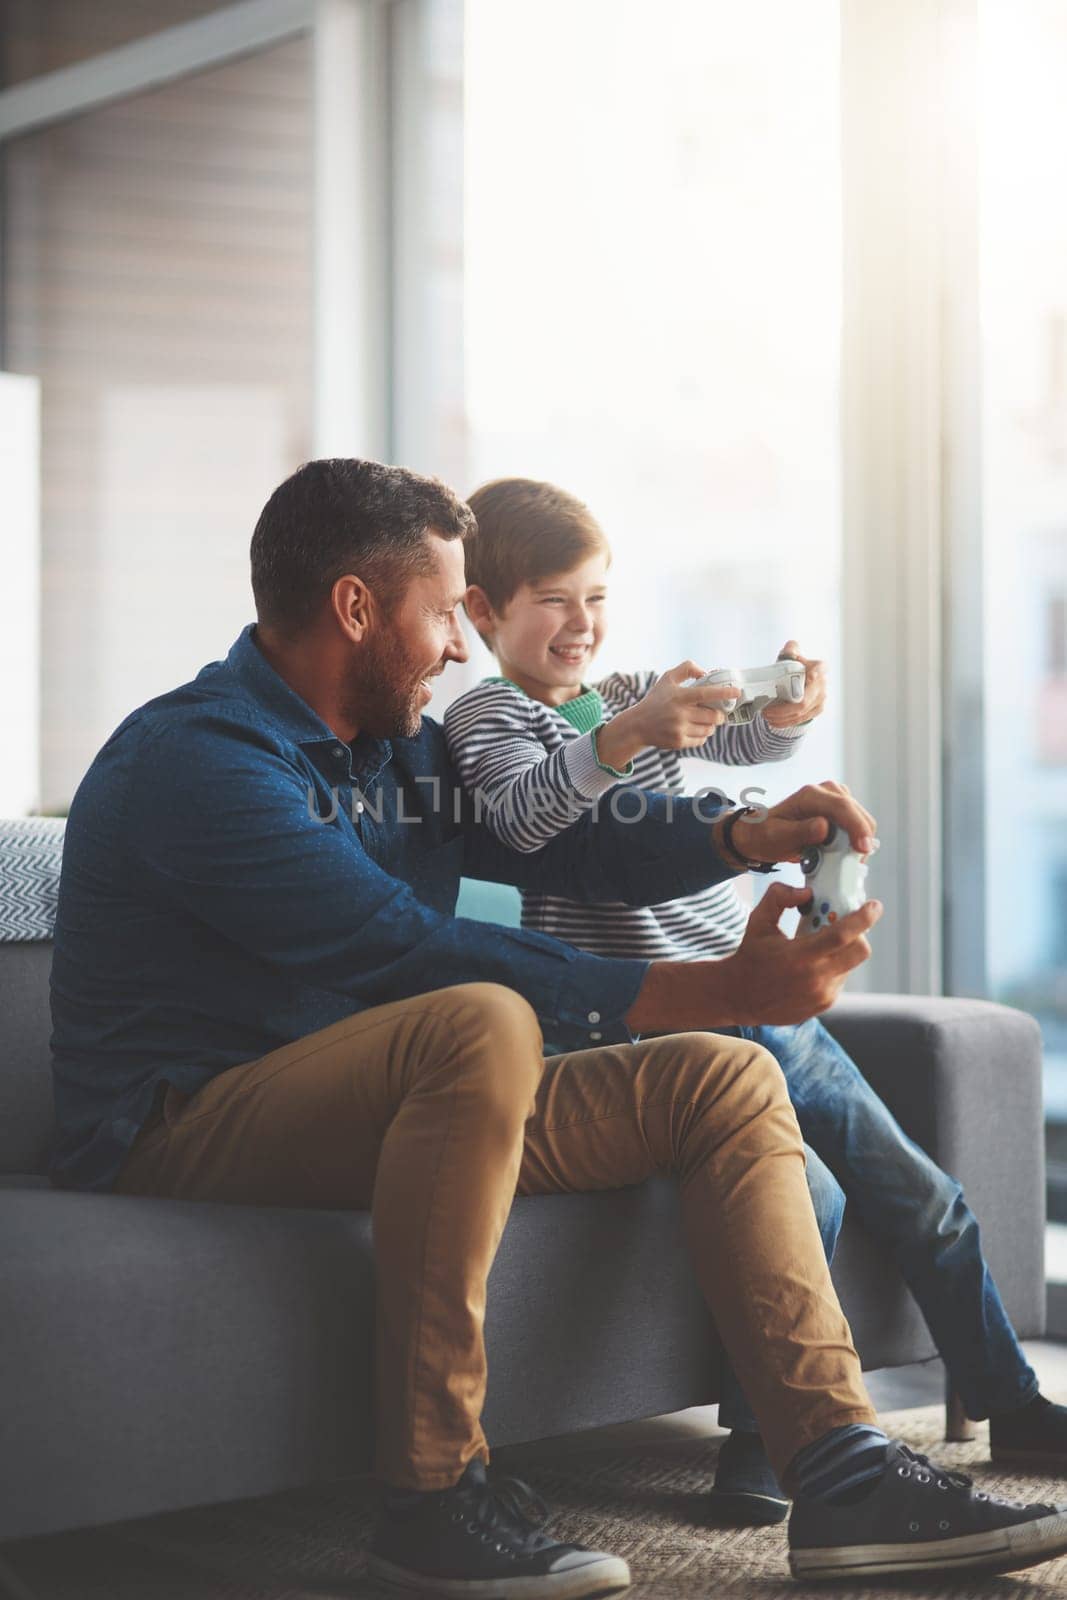 This is our most favorite game. a cheerful little boy and his father playing video games together on the television while being seated on the sofa at home during the day